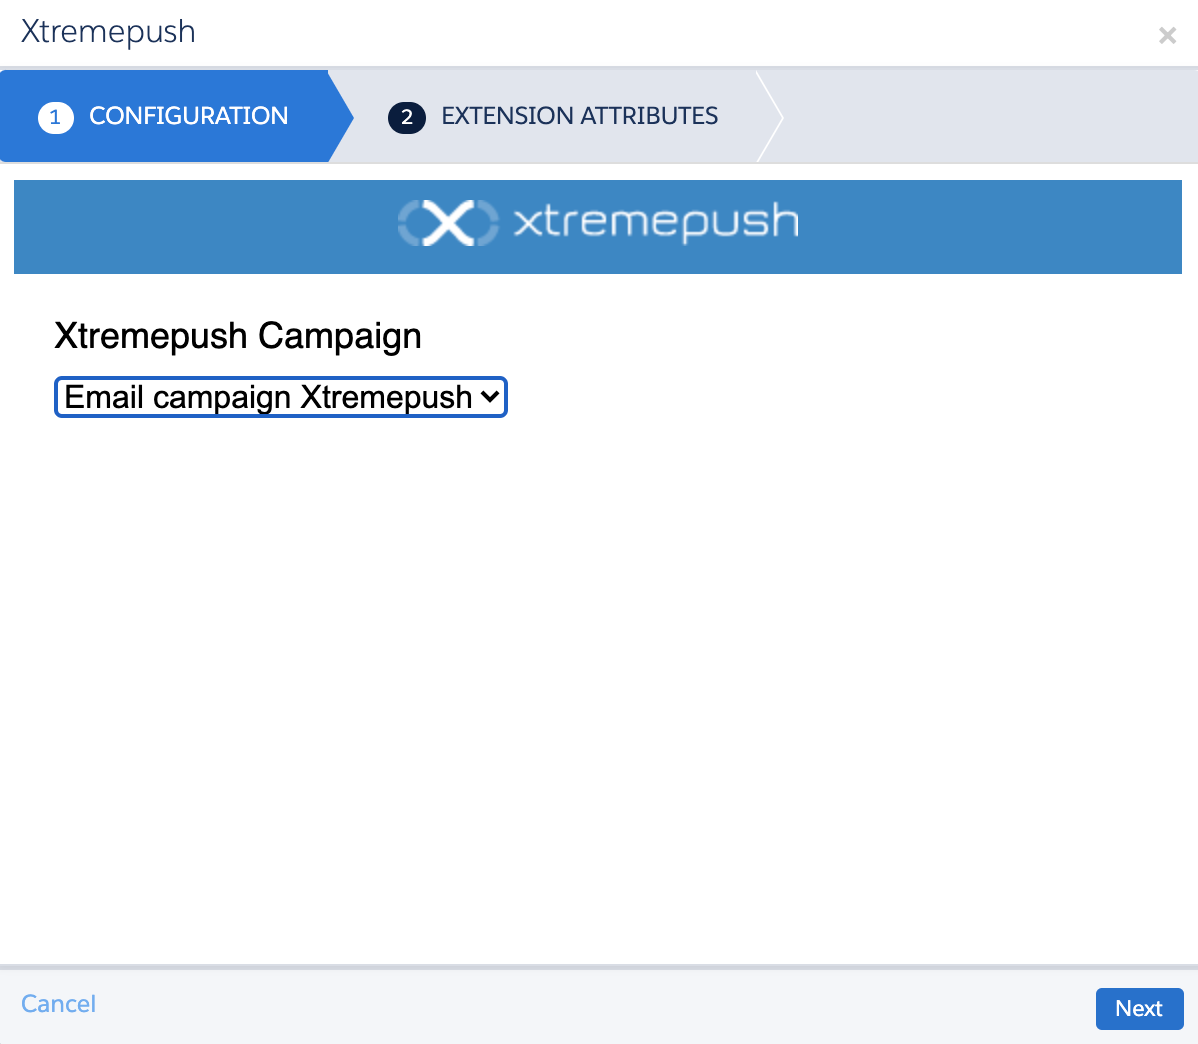 Select the Xtremepush campaign from the dropdown.